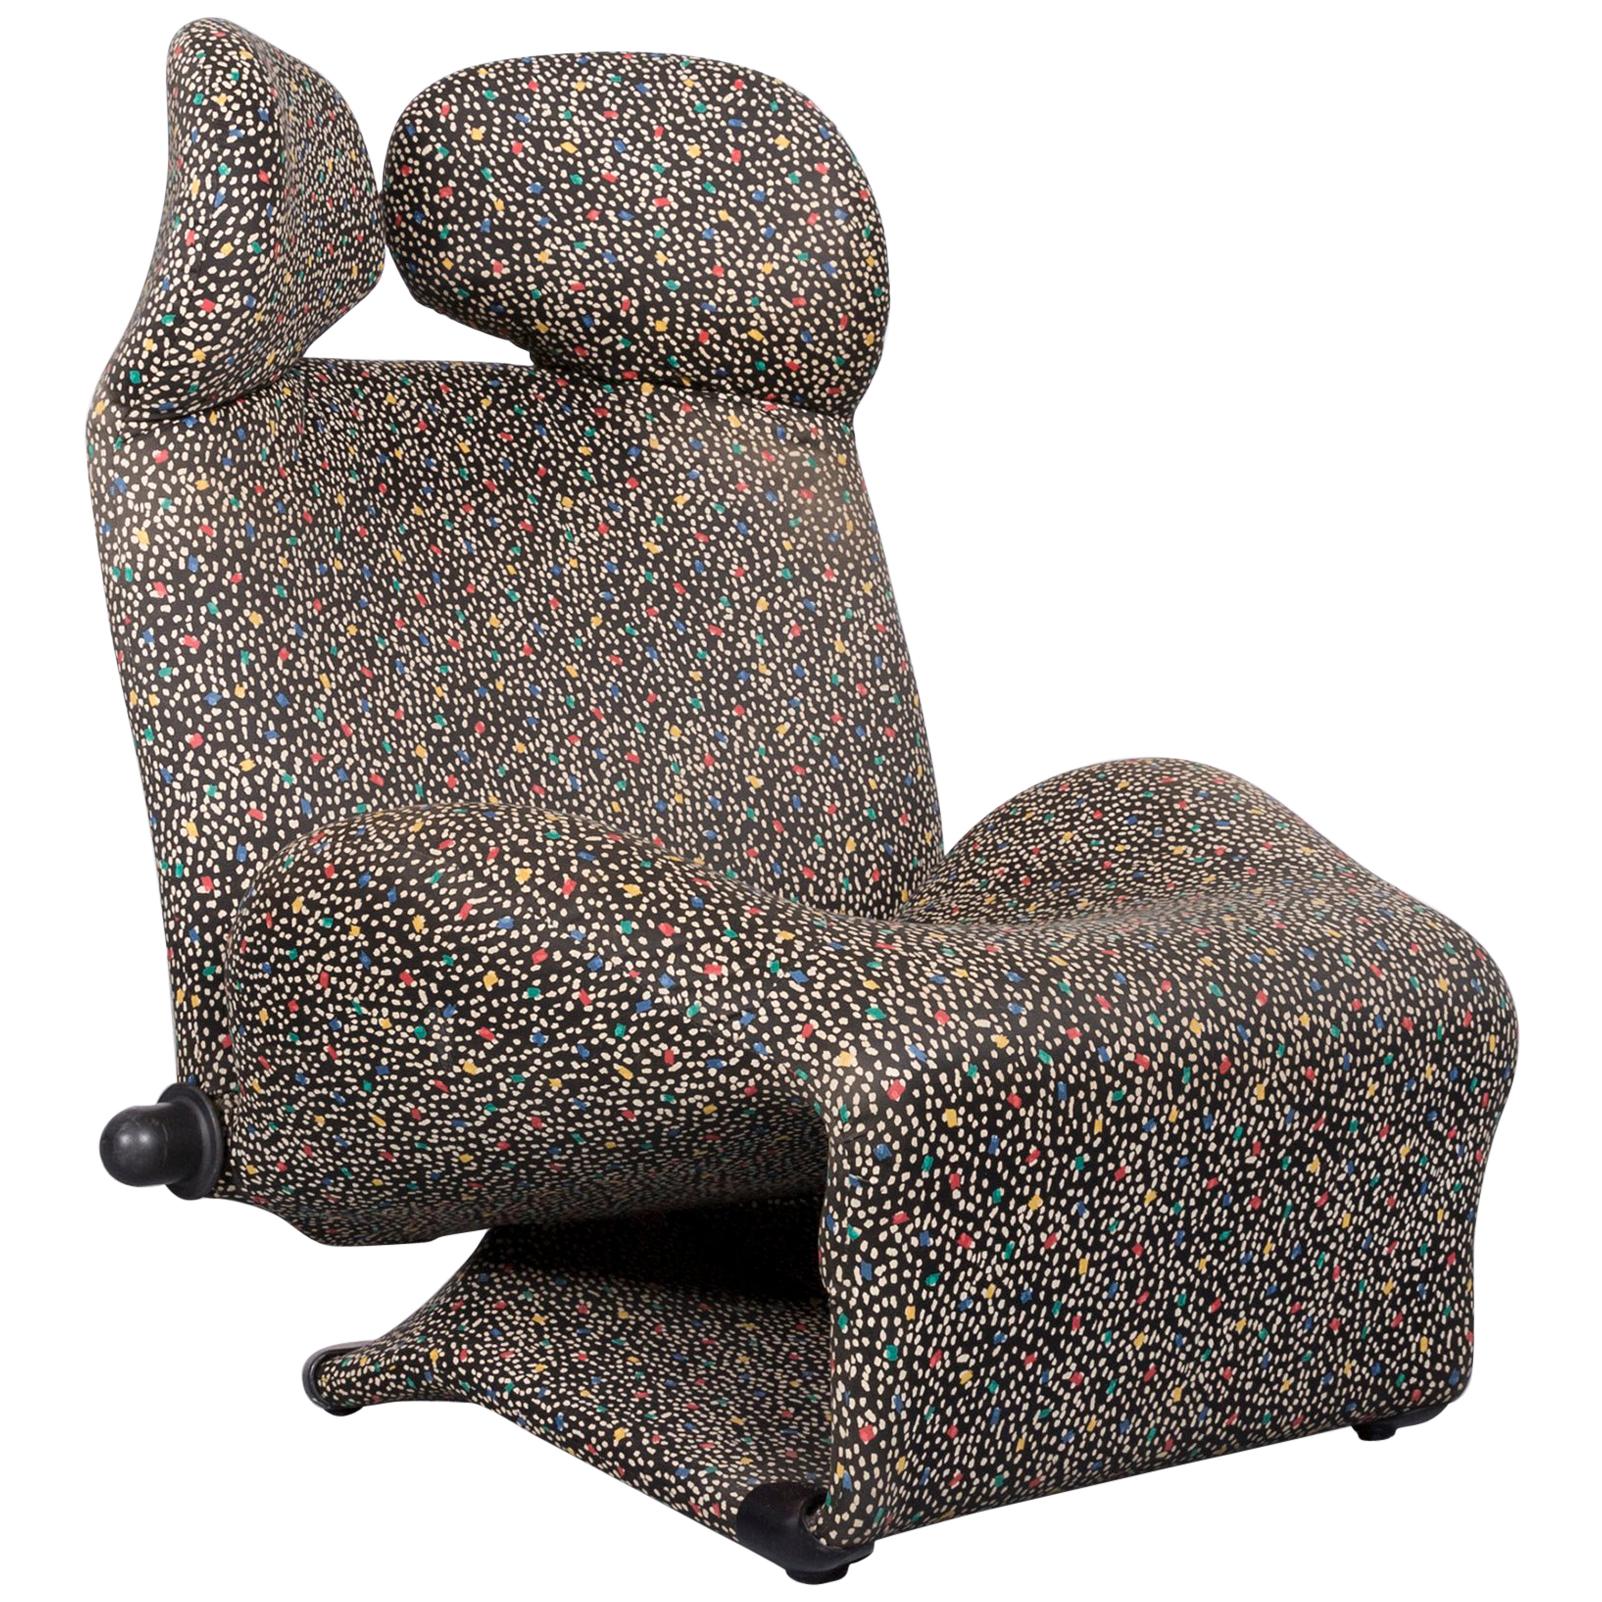 Cassina Wink Designer Fabric Armchair Chair Relax Function For Sale